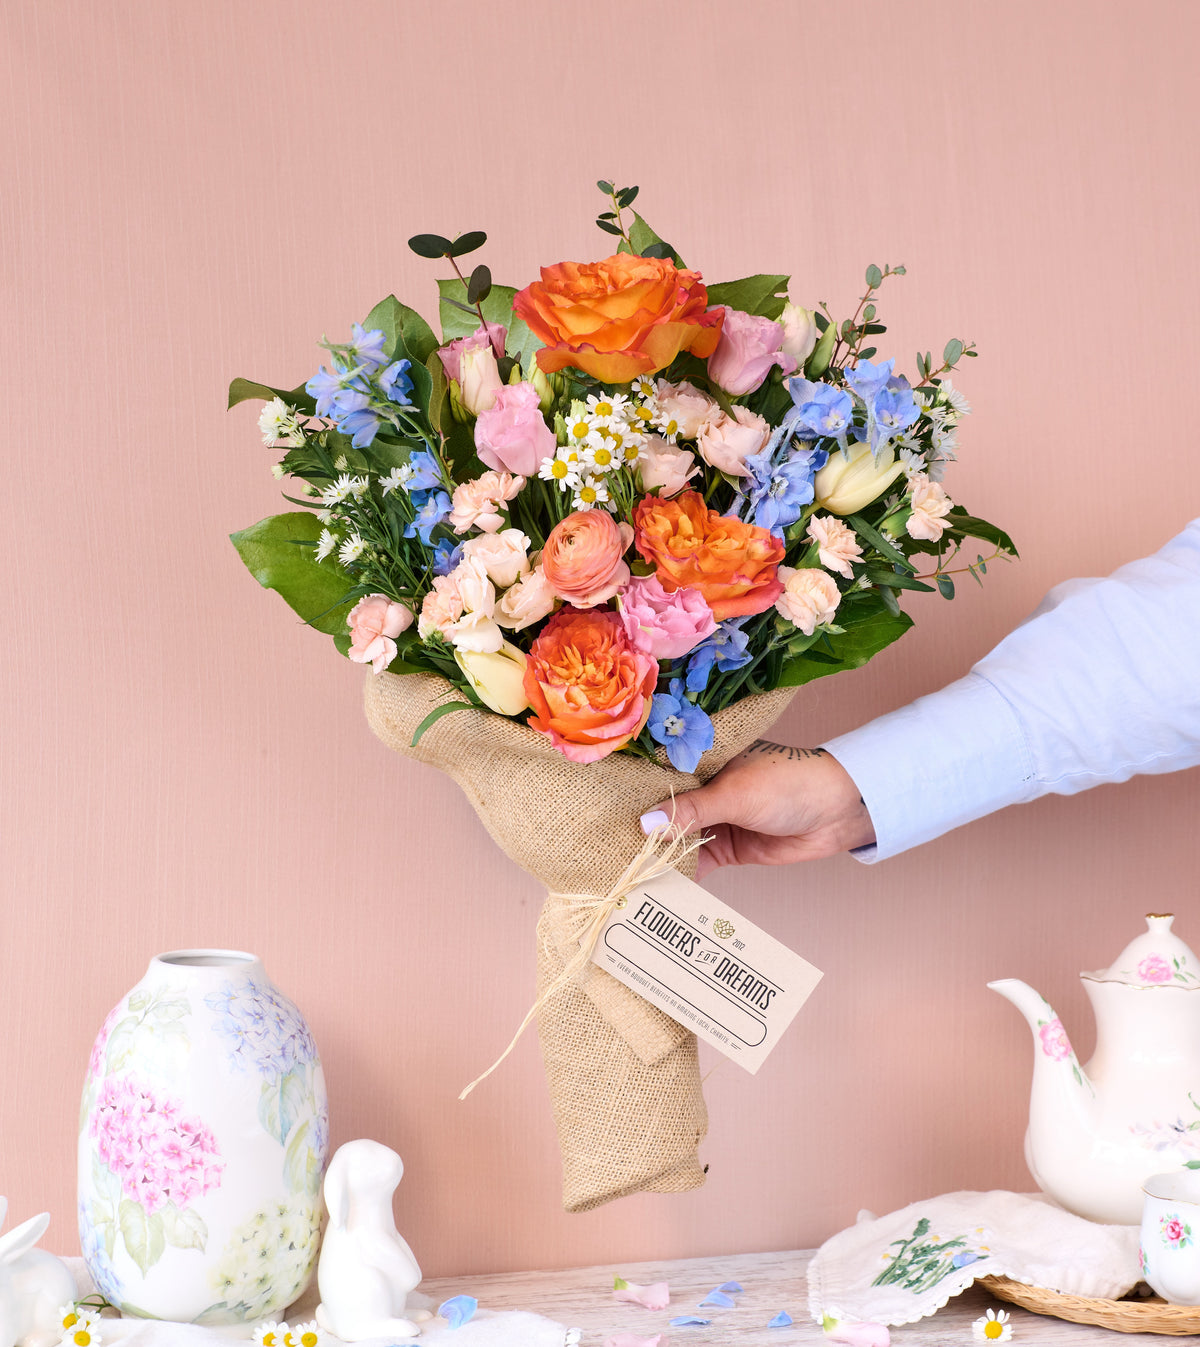 3 Benefits of Sending Flowers to Your Loved Ones